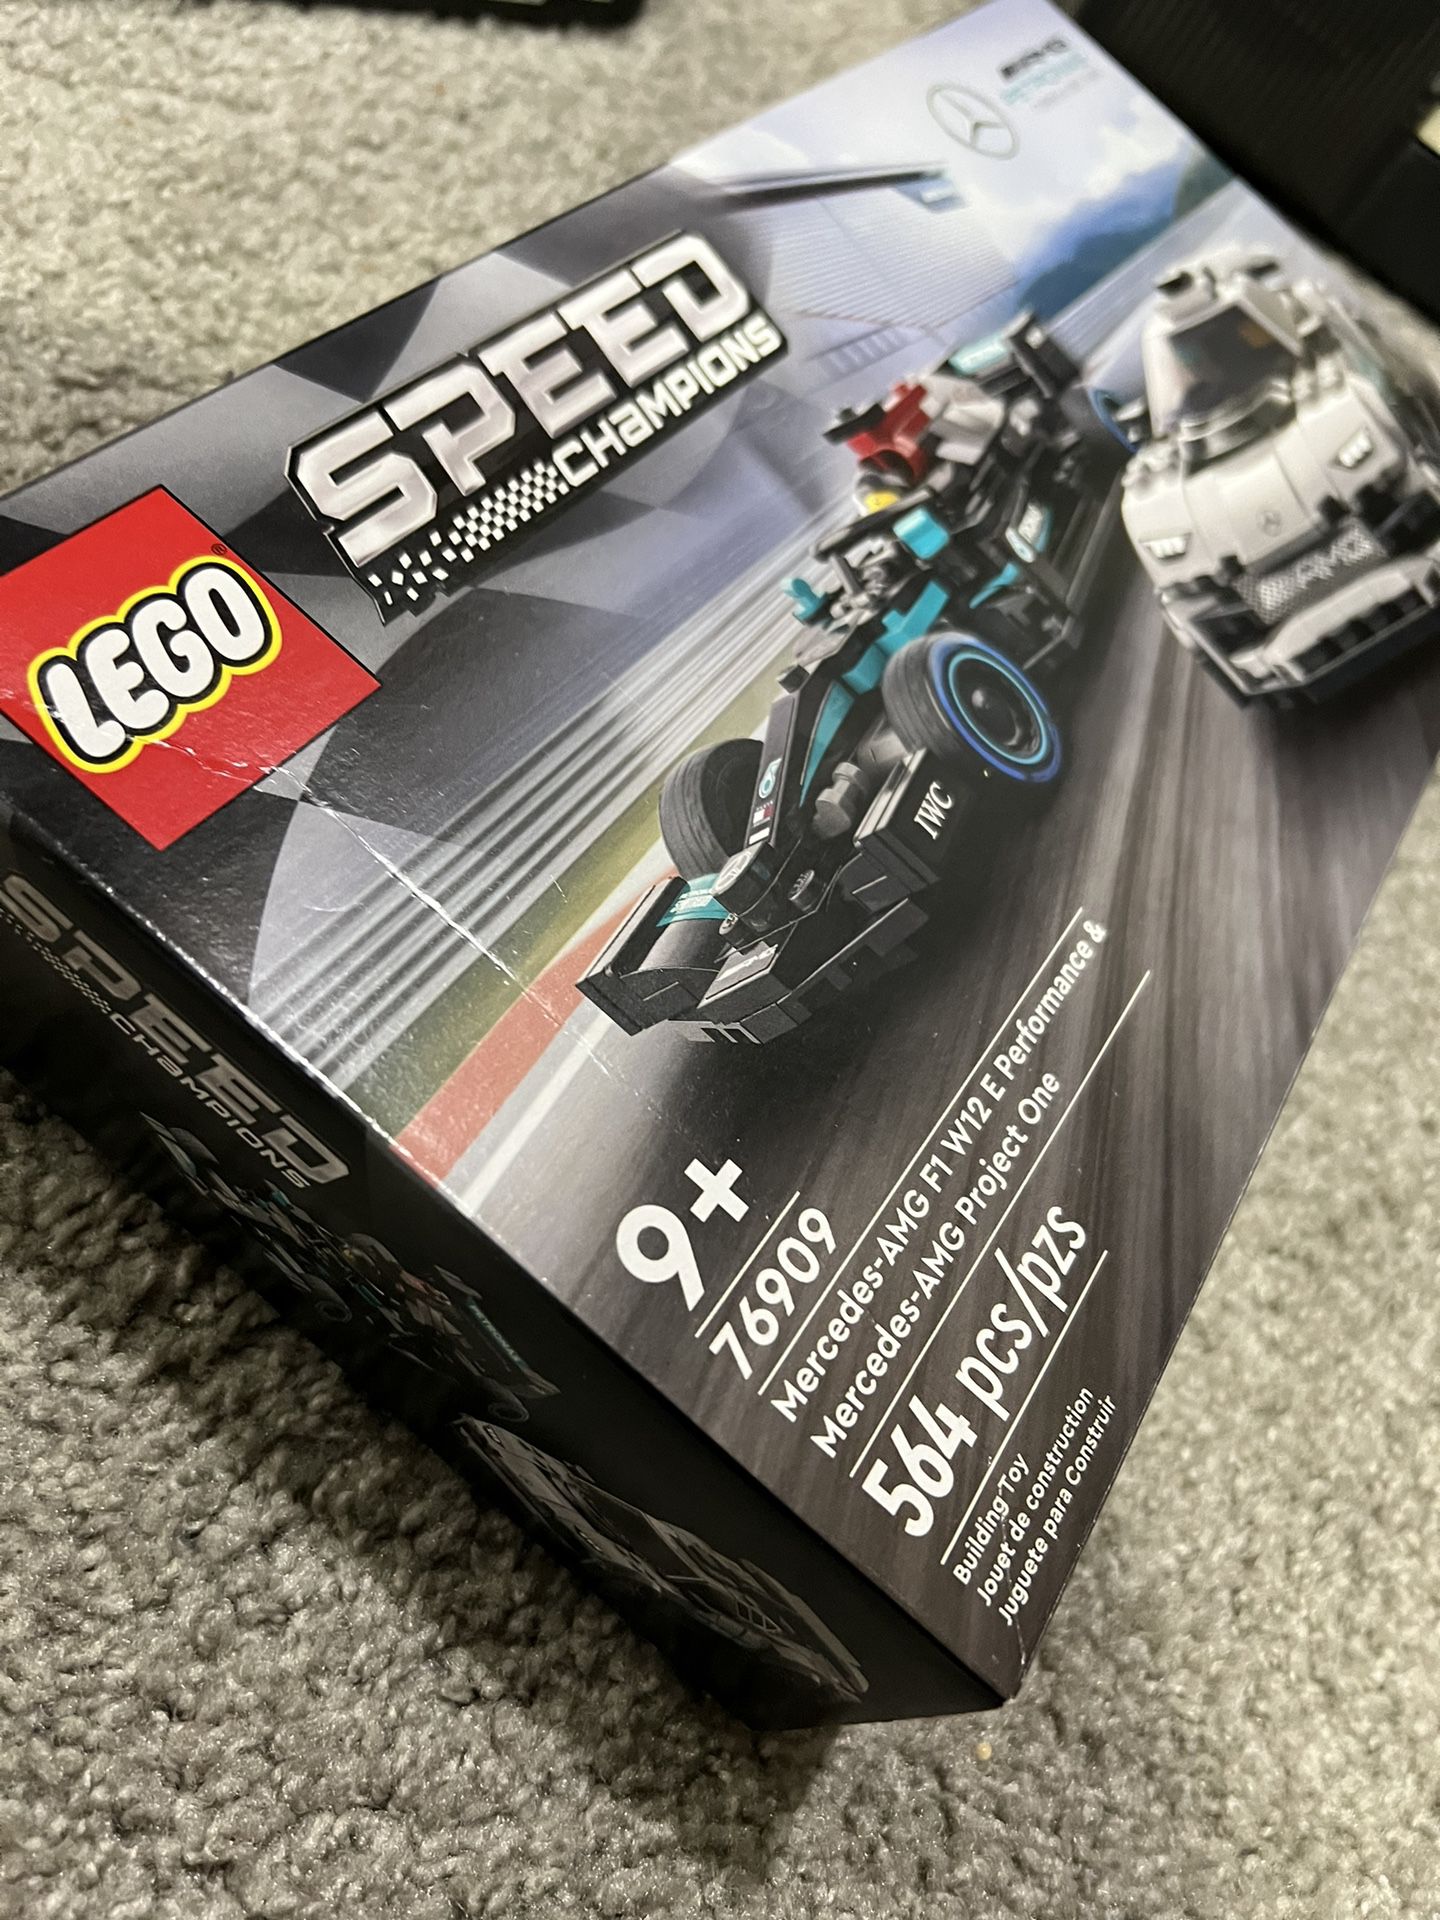 LEGO Speed Champions Mercedes-AMG F1 W12 E 76909 Performance & Project One  Toy Car Set, Mercedes Model Car Building Kit, Collectible Race Car Toy